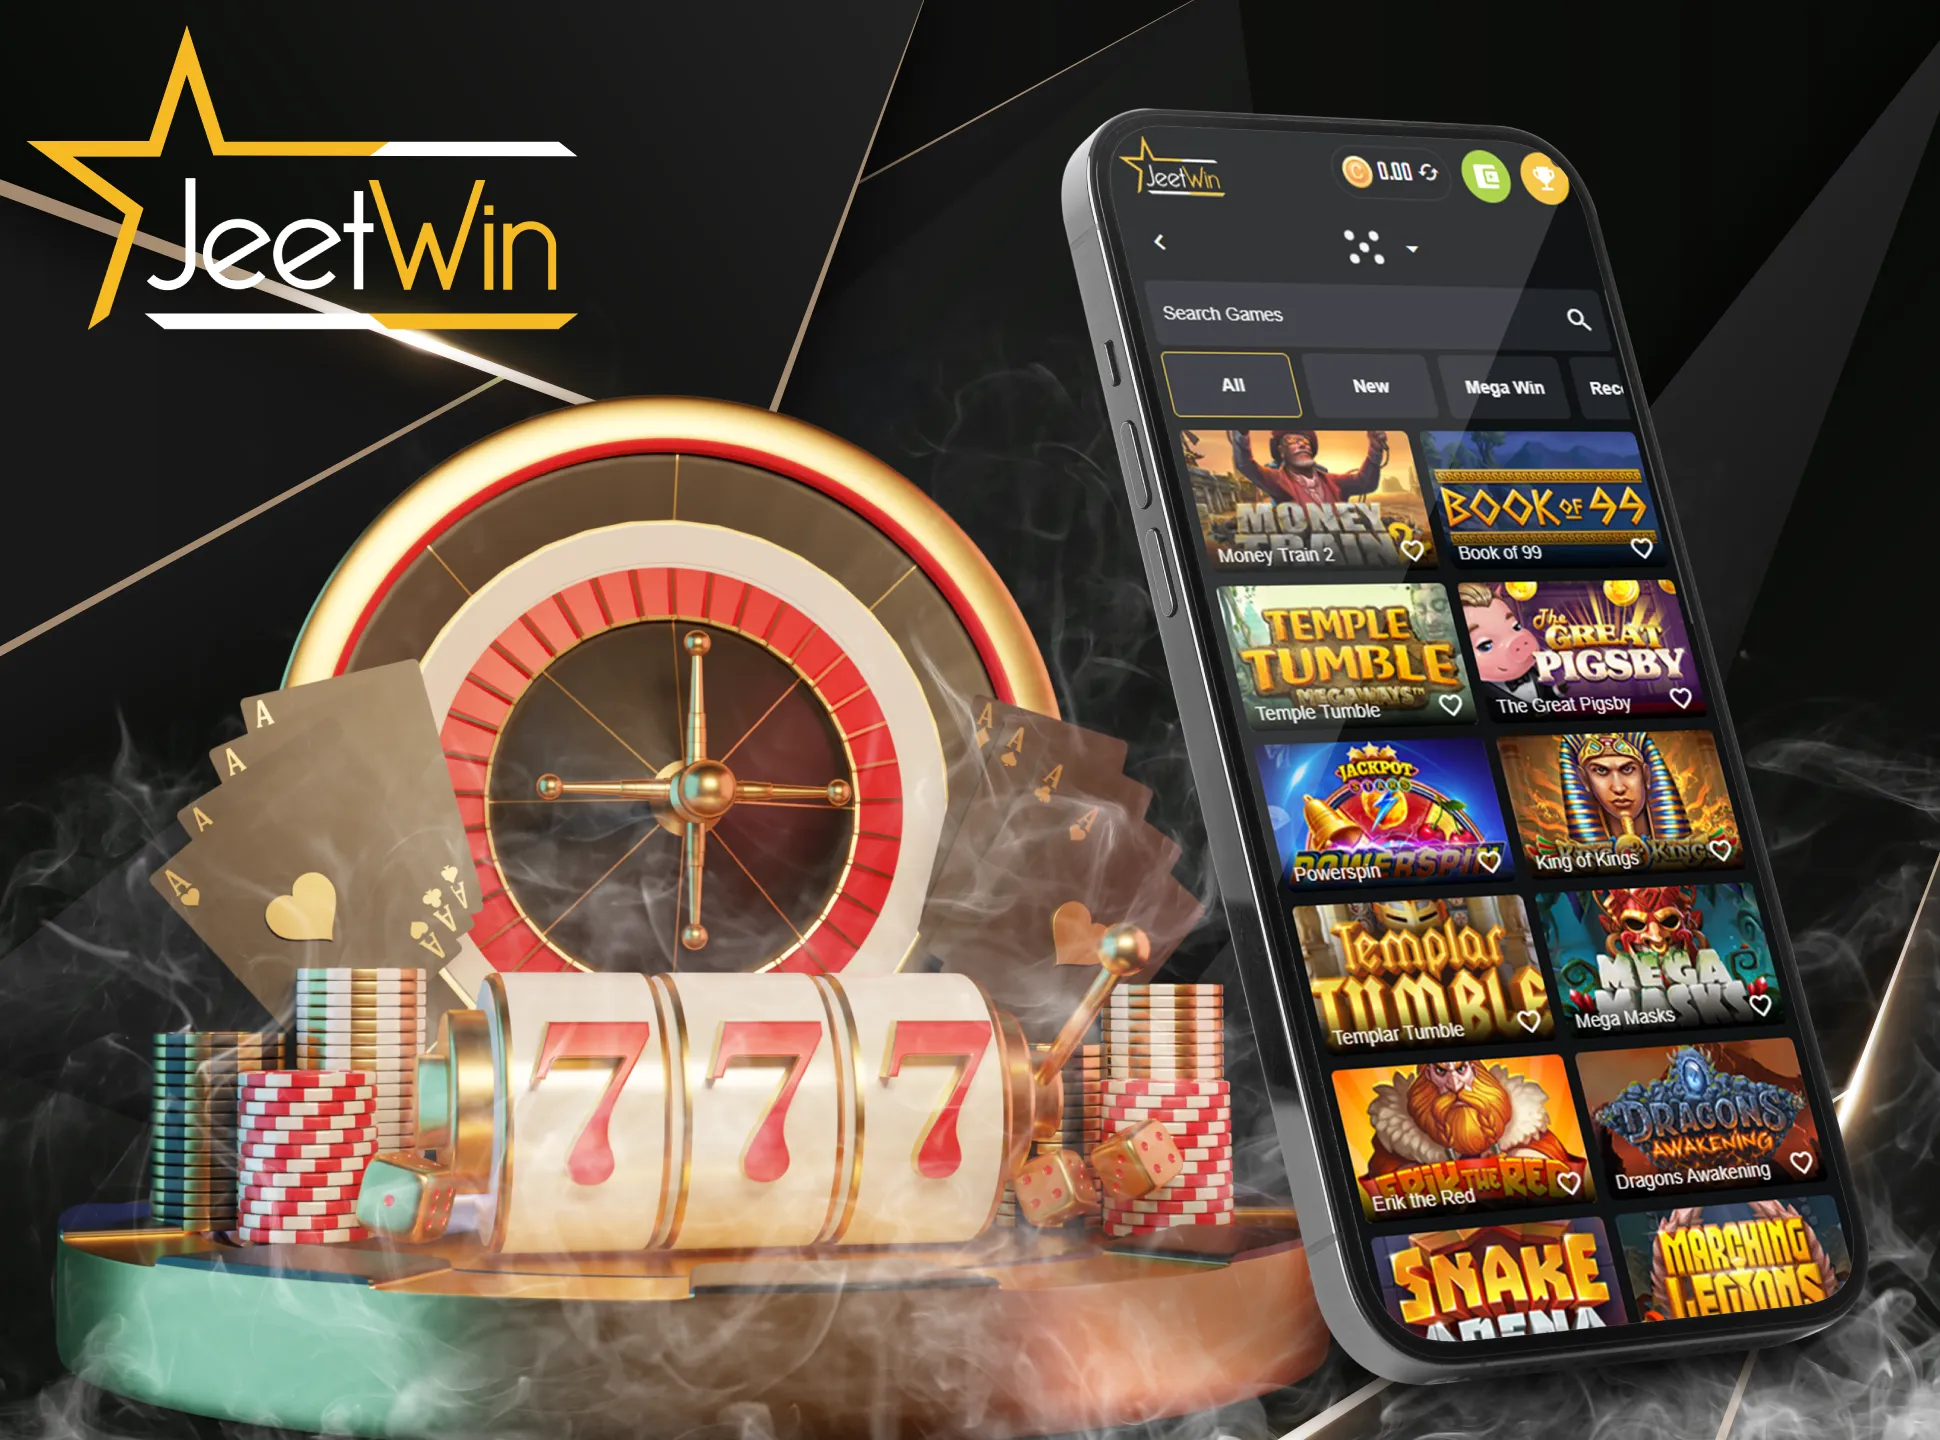 Open the Slots category on the JeetWin app and get quick wins.